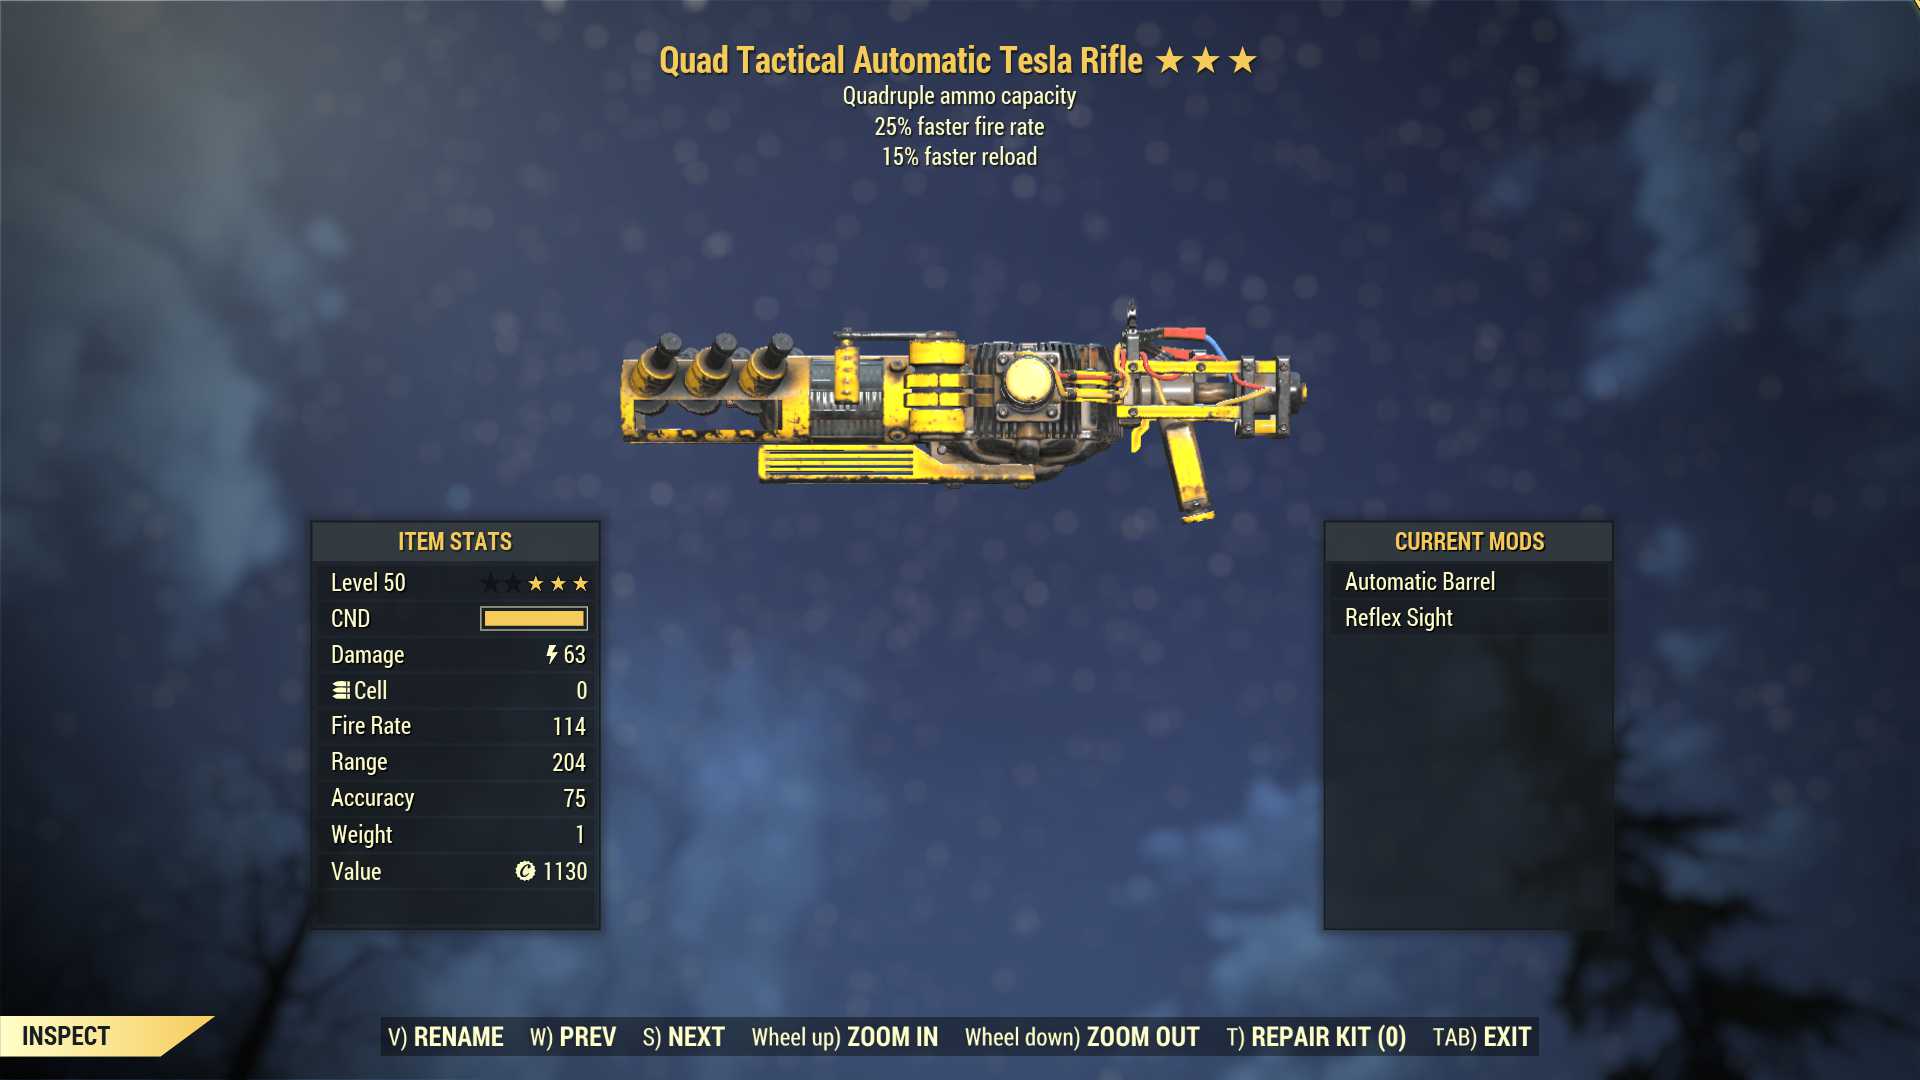 Quad Tesla rifle (25% faster fire rate, 15% faster reload)